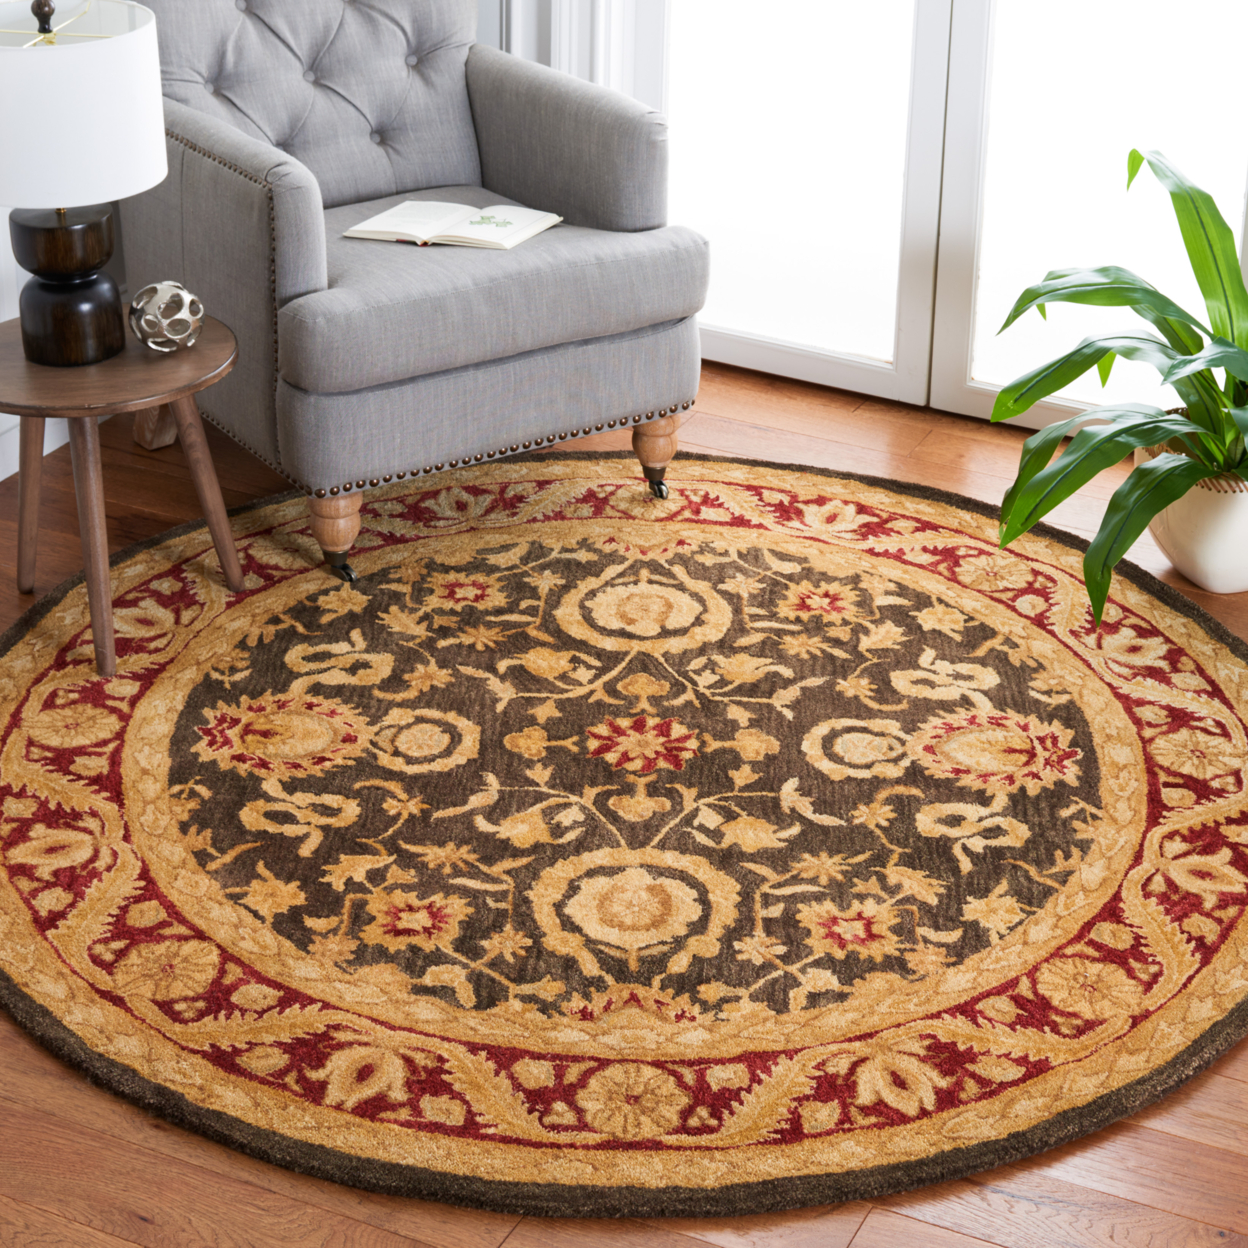 Safavieh Anatolia Spencer Traditional Wool Runner Rug, Charcoal/Red, 2'3" x 10' - image 2 of 10